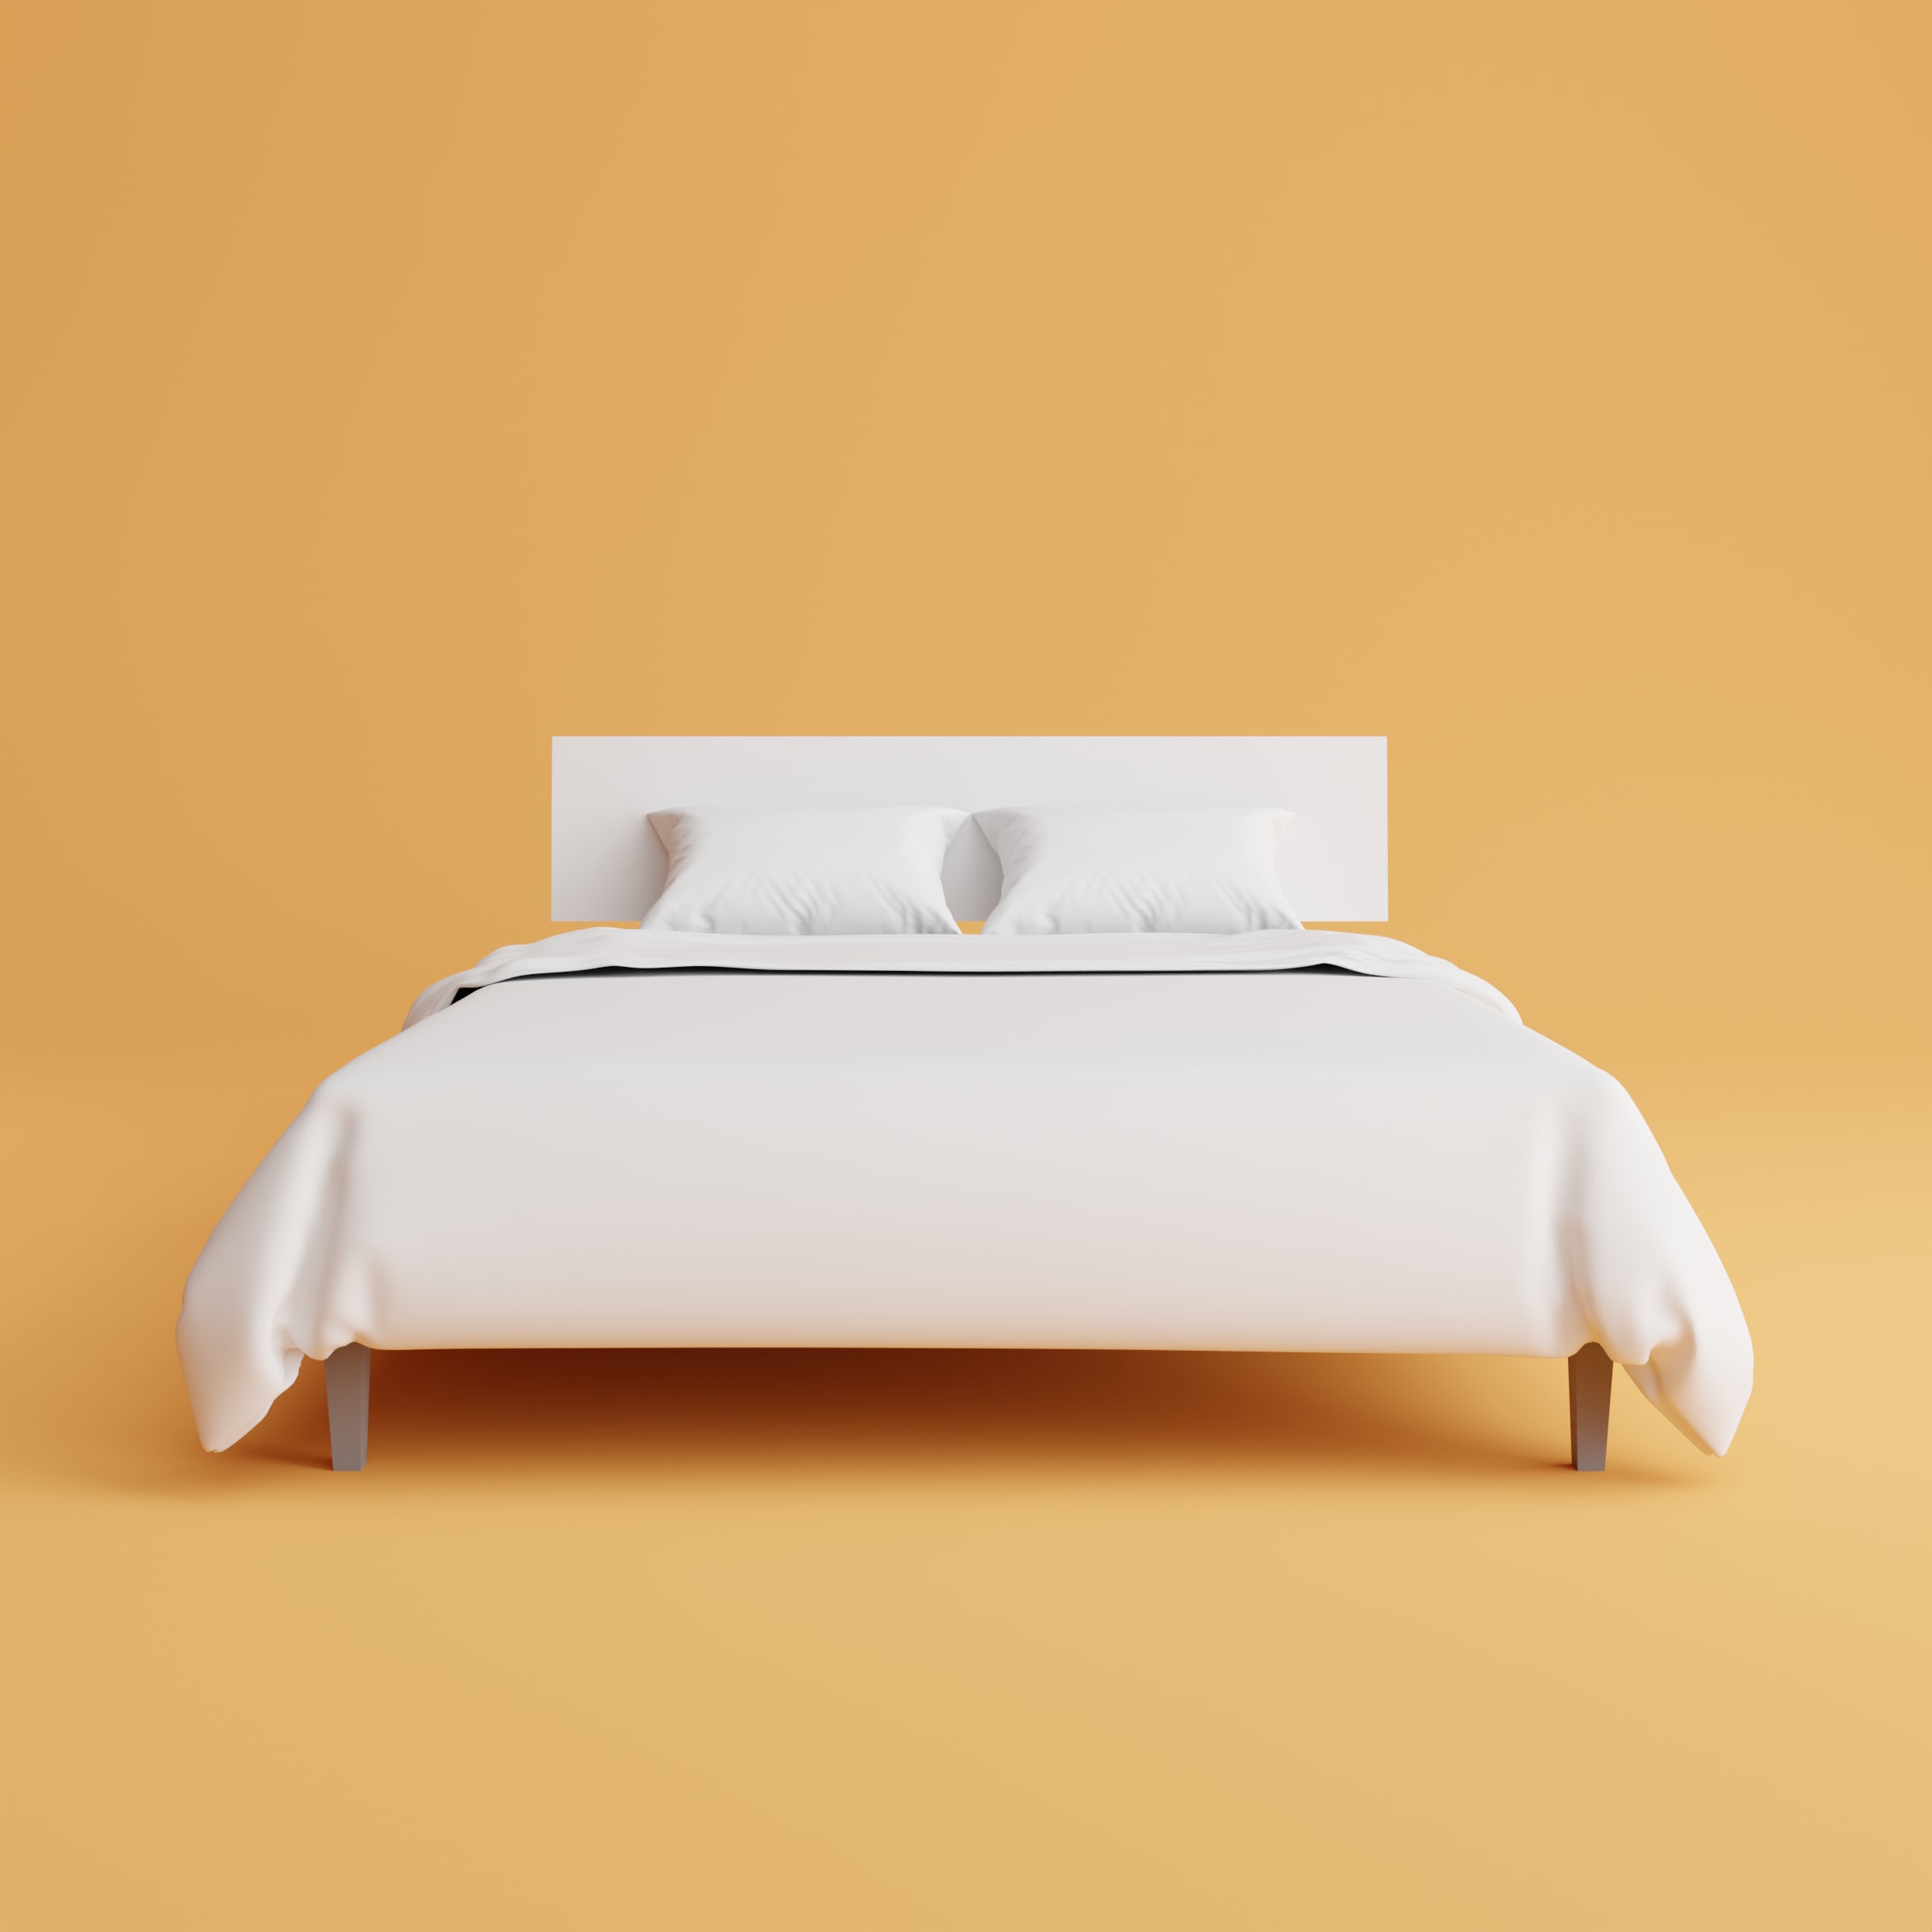 How to Choose the best Mattress or Pillow - Complete buying guide